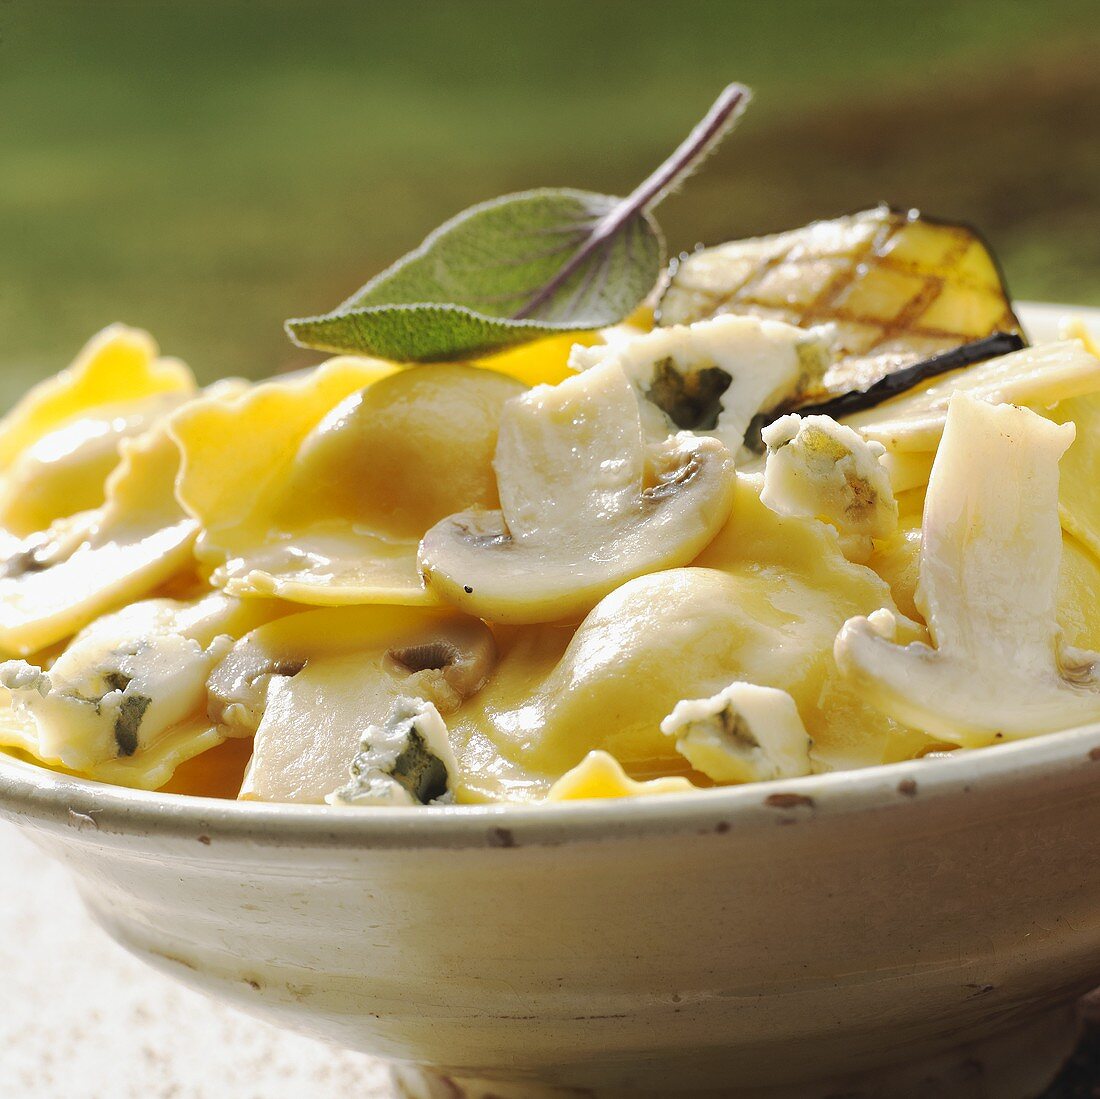 Ravioli with sliced mushrooms and blue cheese